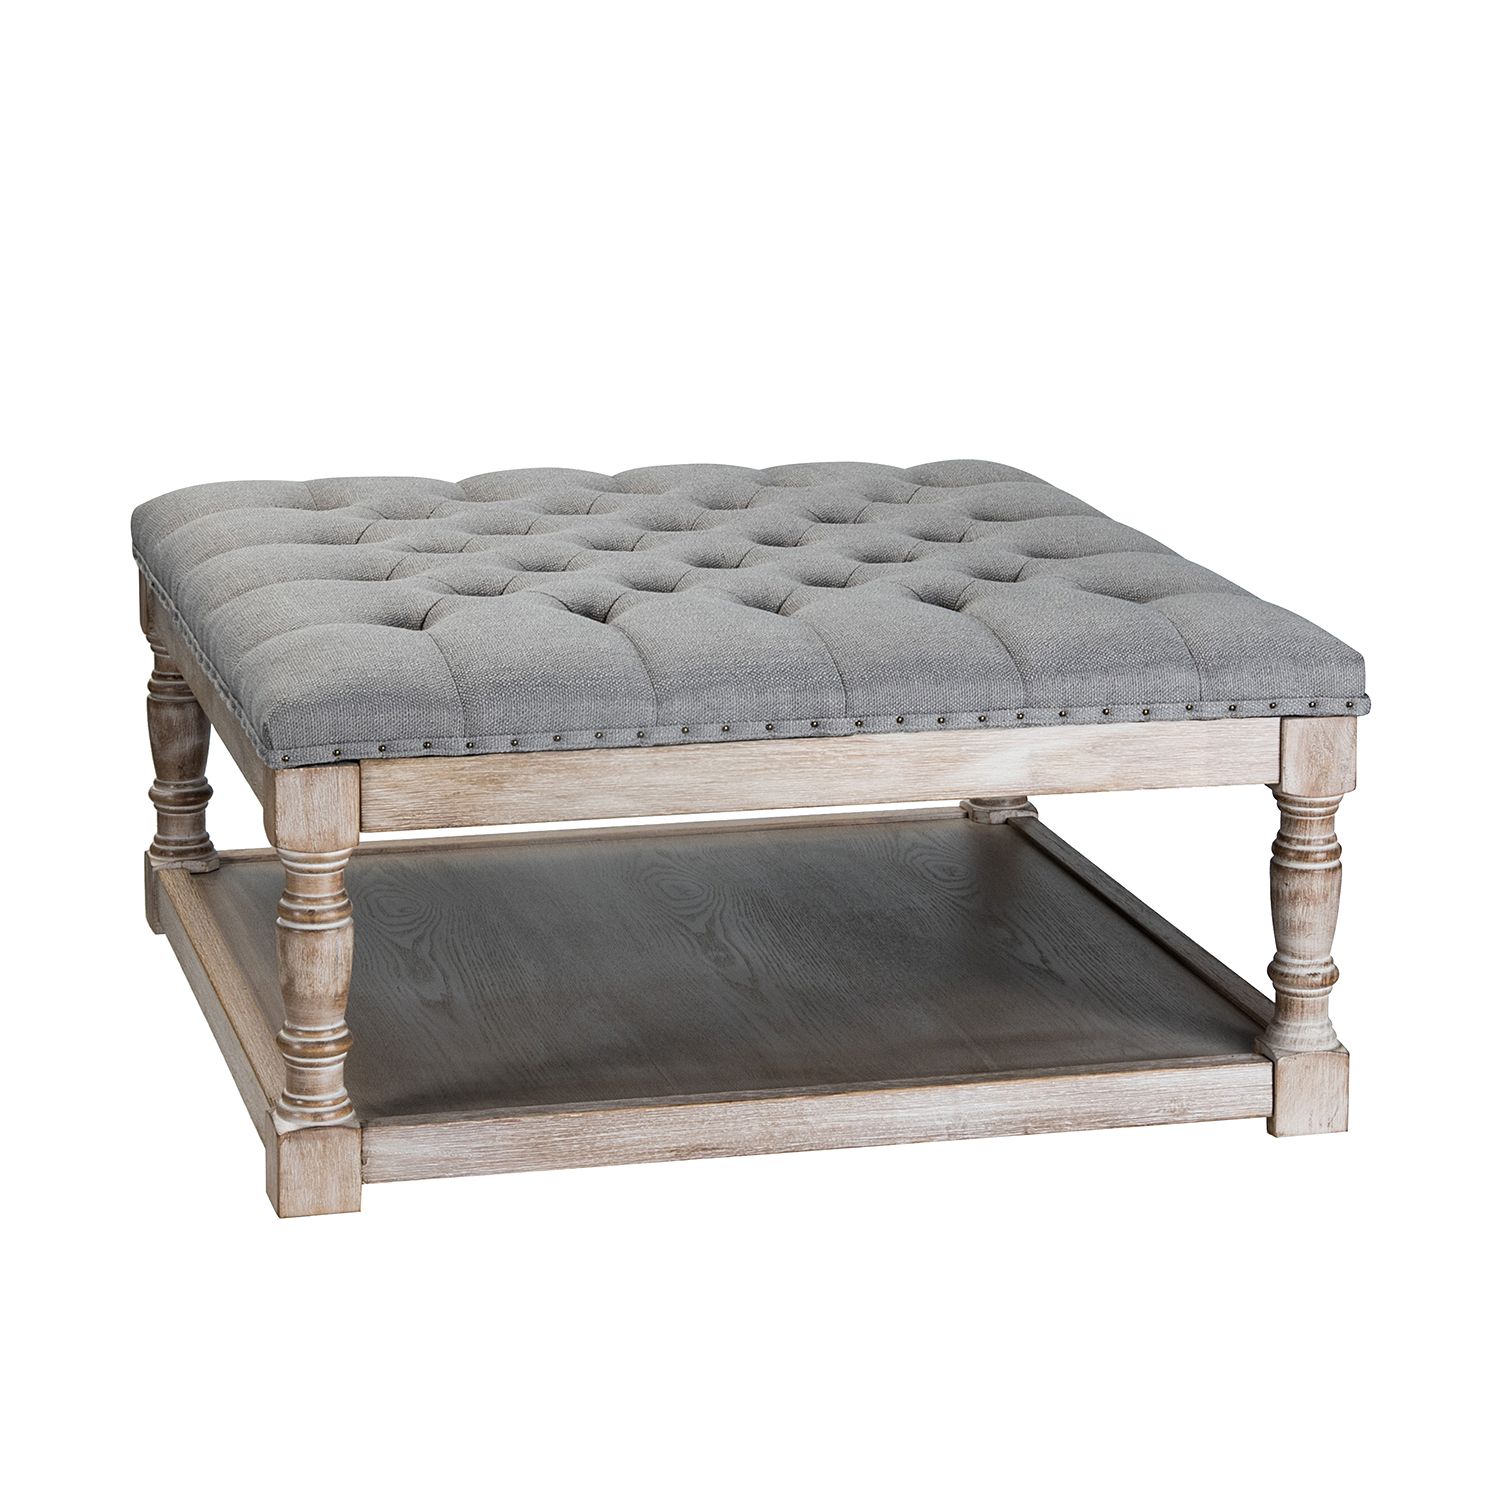 14 Karat Home Tufted Cocktail Ottoman Wooden With Storage Shelf, Square  Upholstered Ottoman Coffee Table, Grey – Walmart With Beige Thomas Ottomans (View 5 of 15)